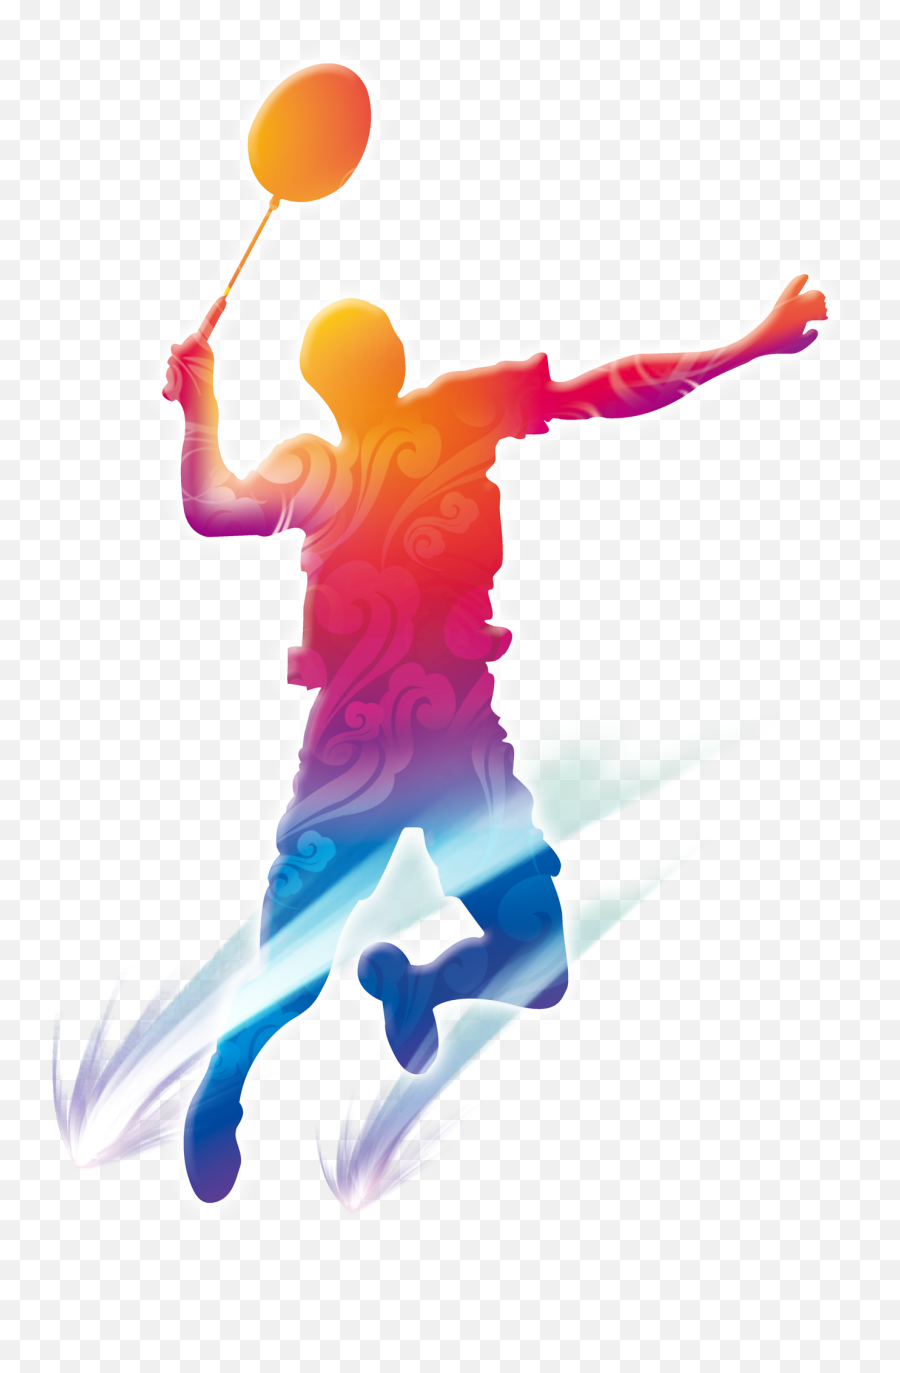 Download Of Silhouettes Badminton Playing People Free Hd Png